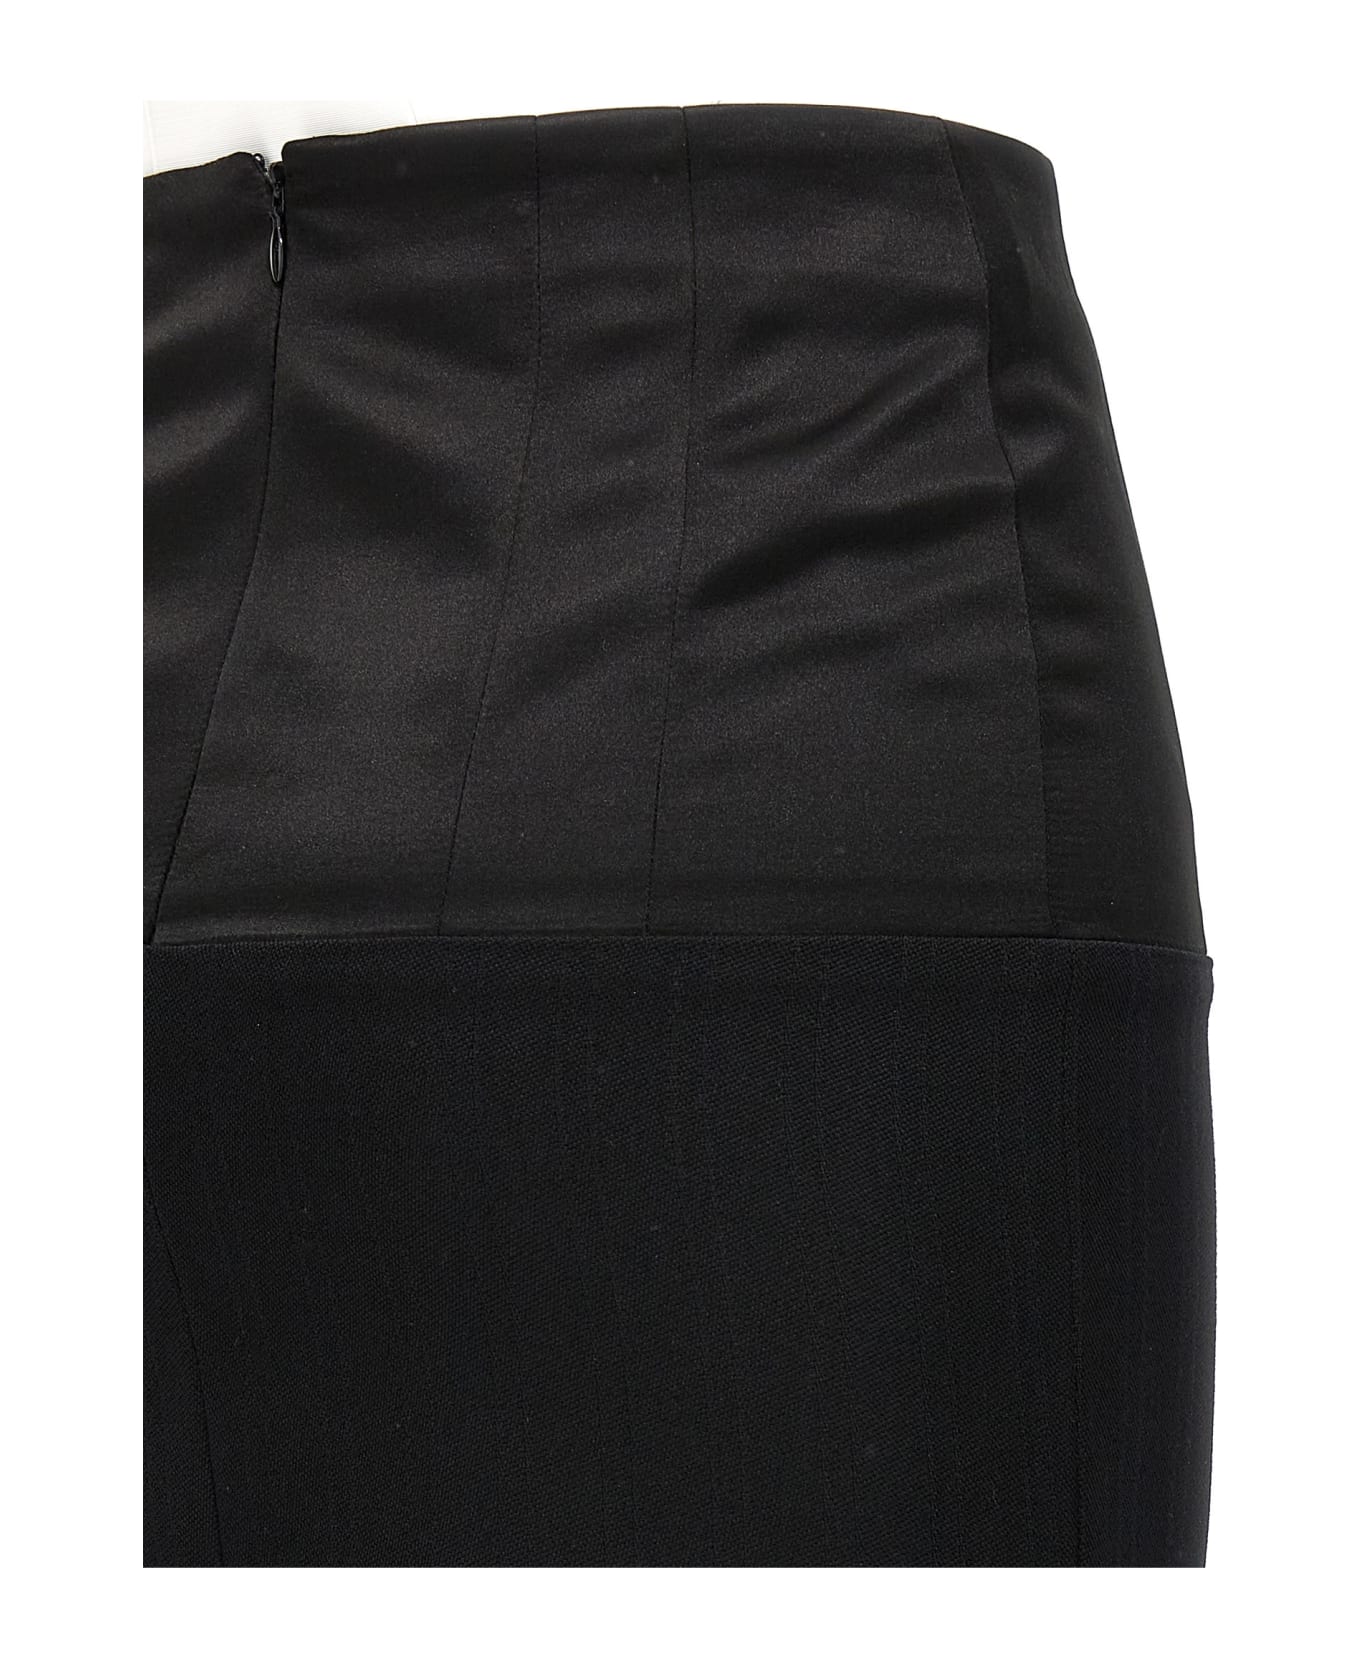 Givenchy wire Tailored Skirt - Black  